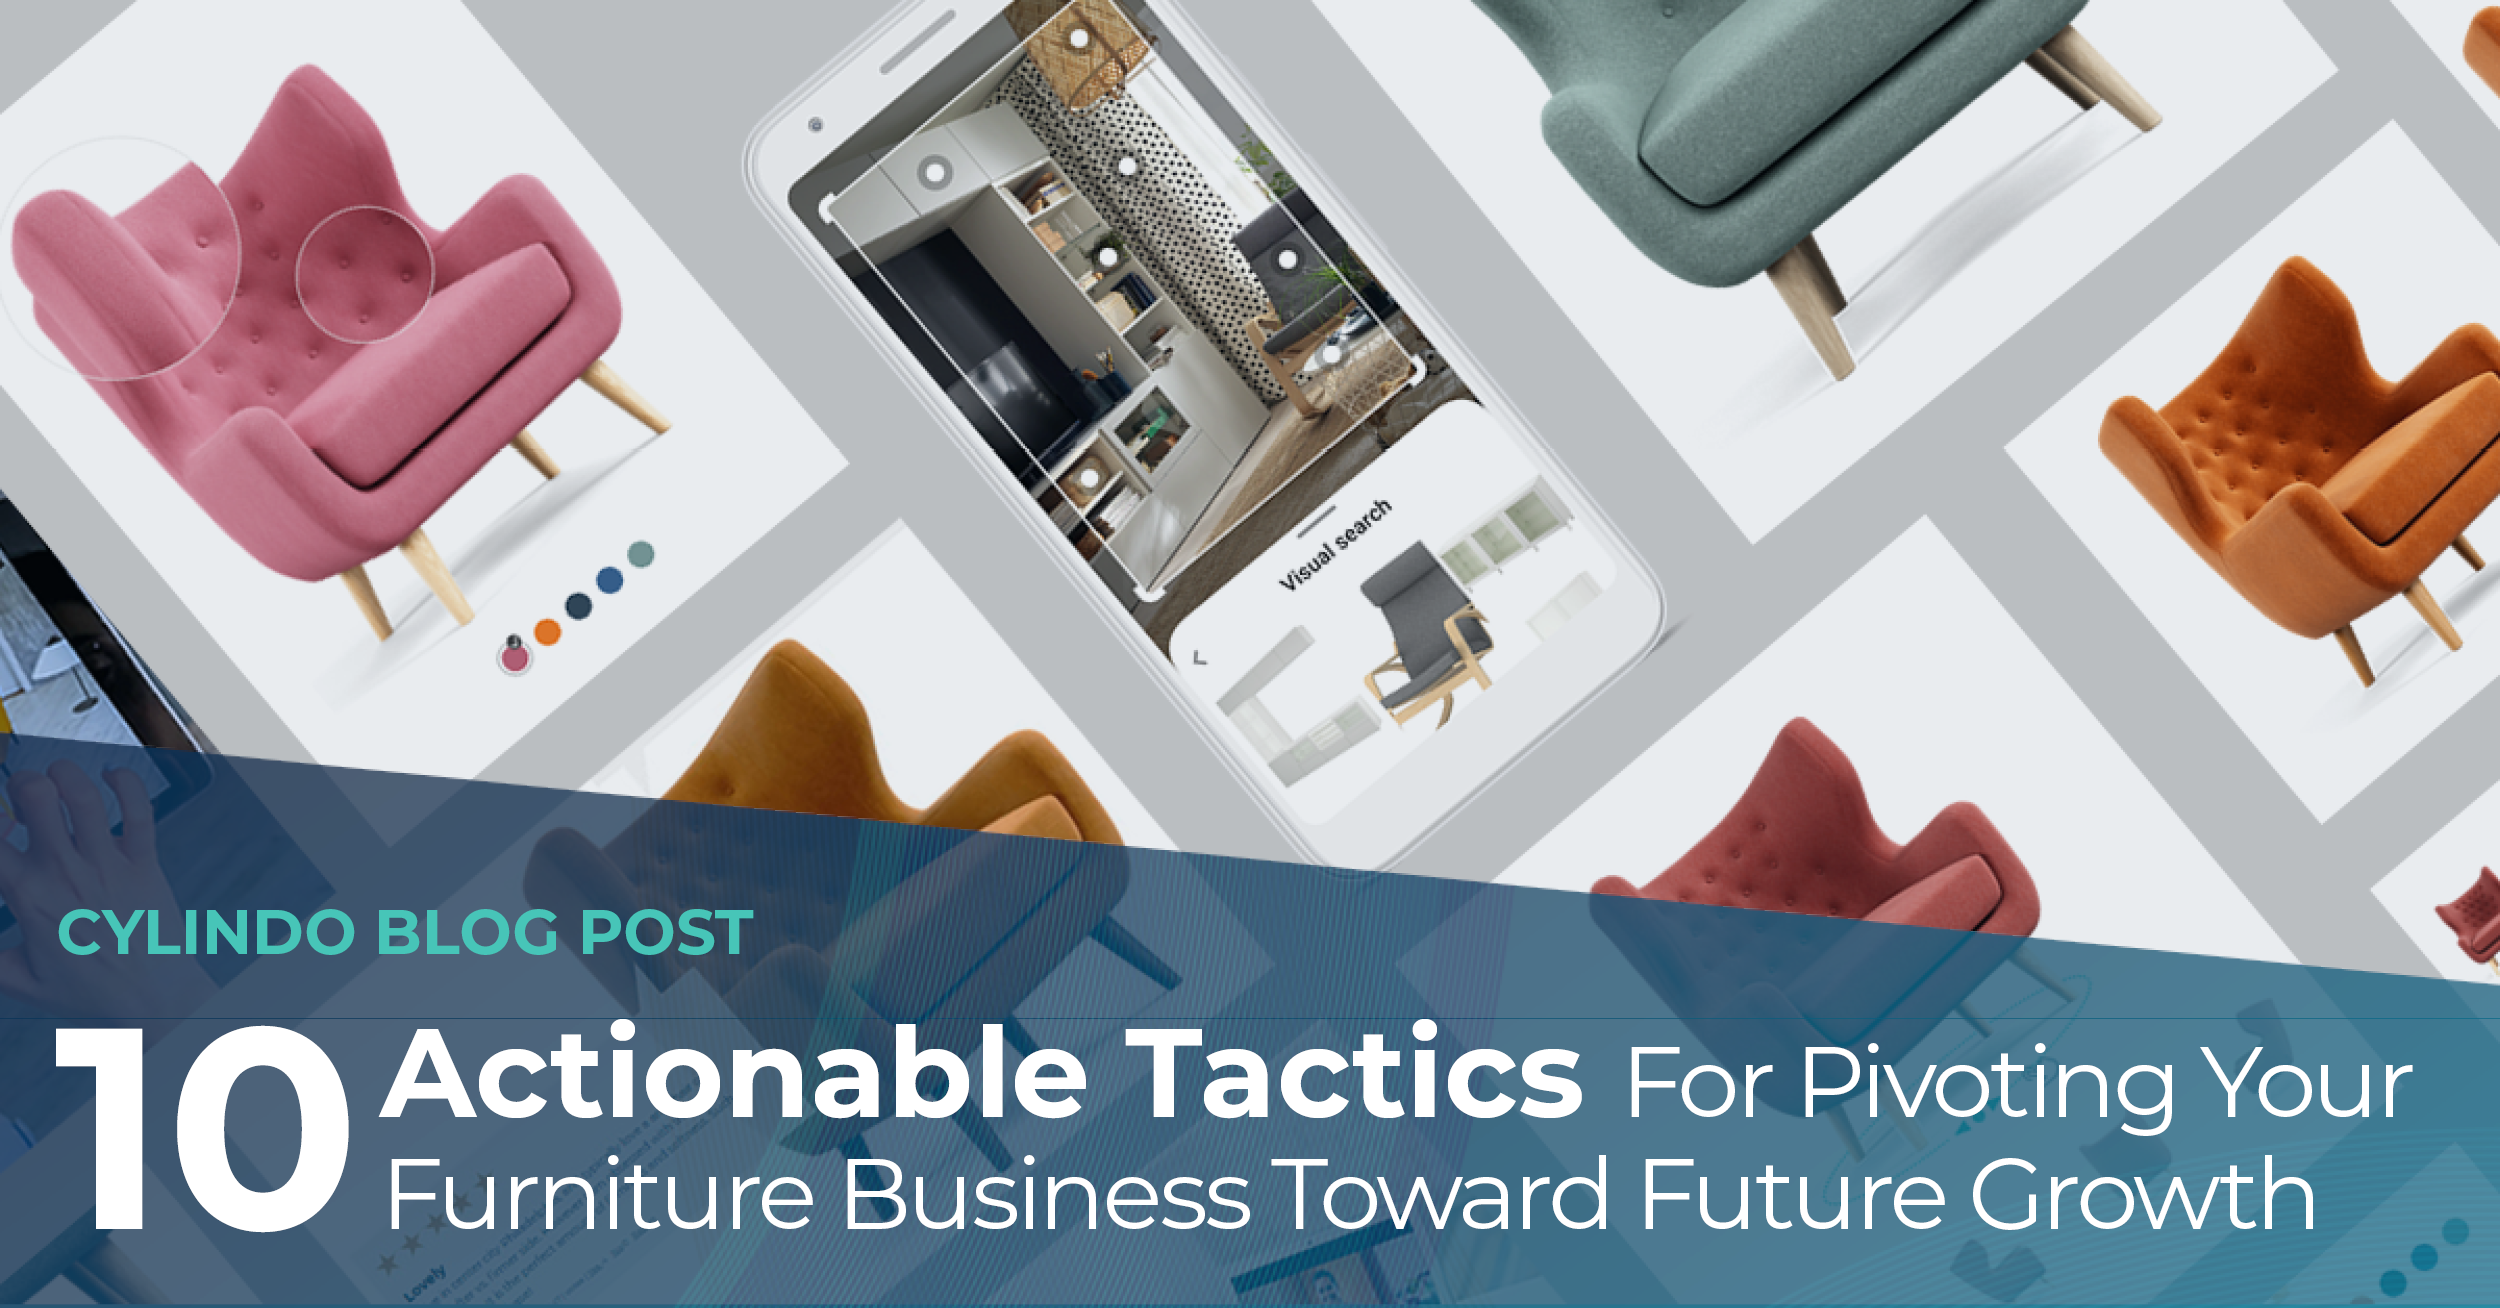 10 Actionable Tactics For Pivoting Your Furniture Business Toward Future Growth